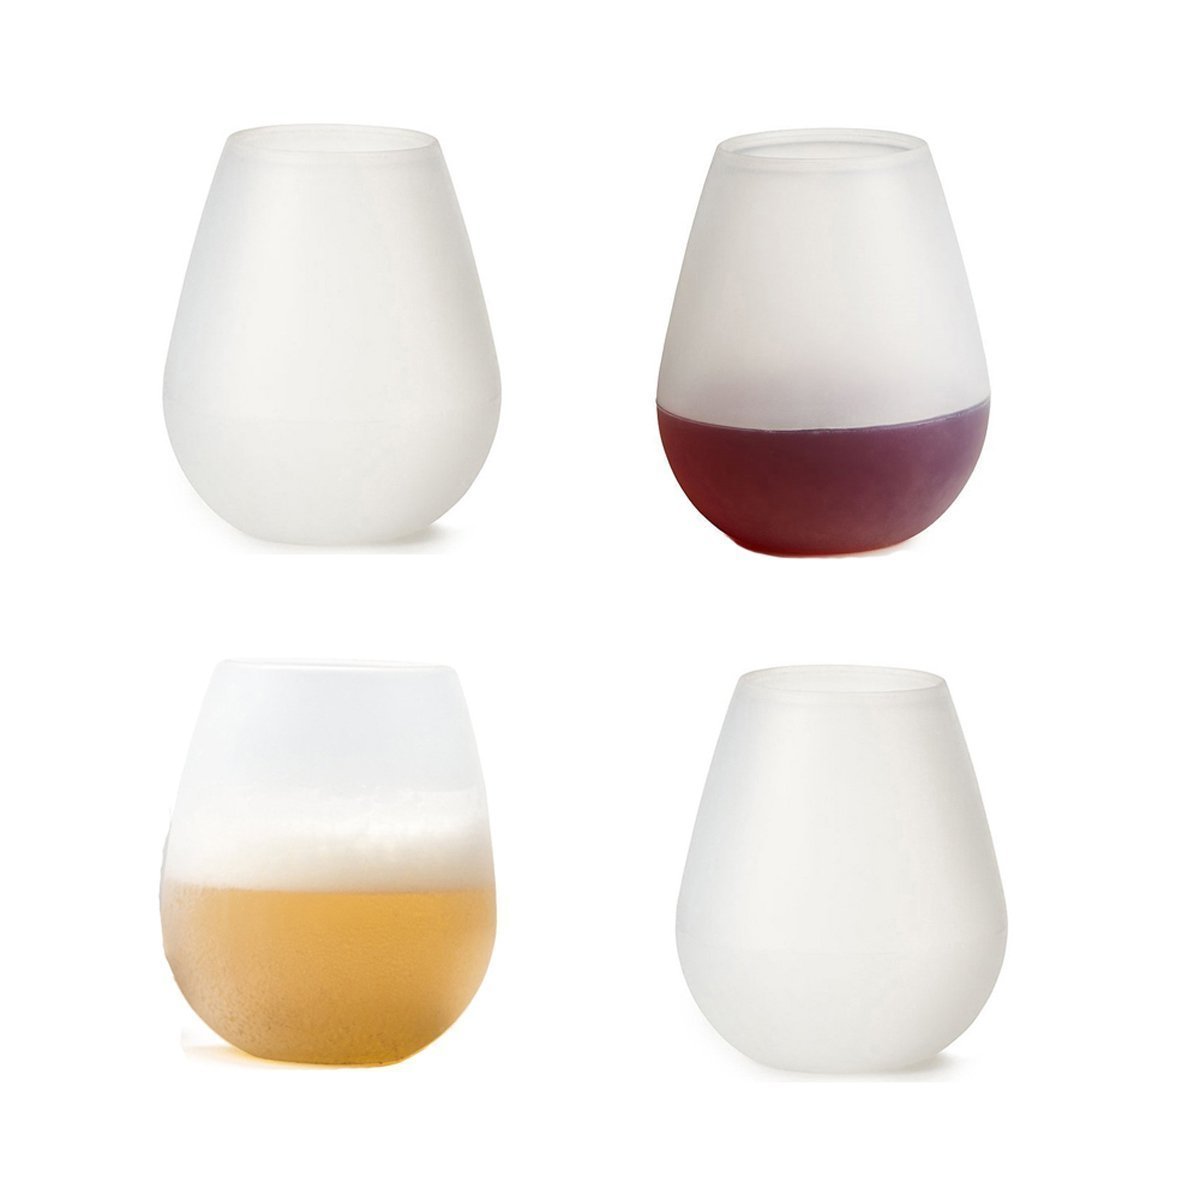 Unbreakable wine glasses (or unbreakable drinking glasses for beer, iced tea, etc.)